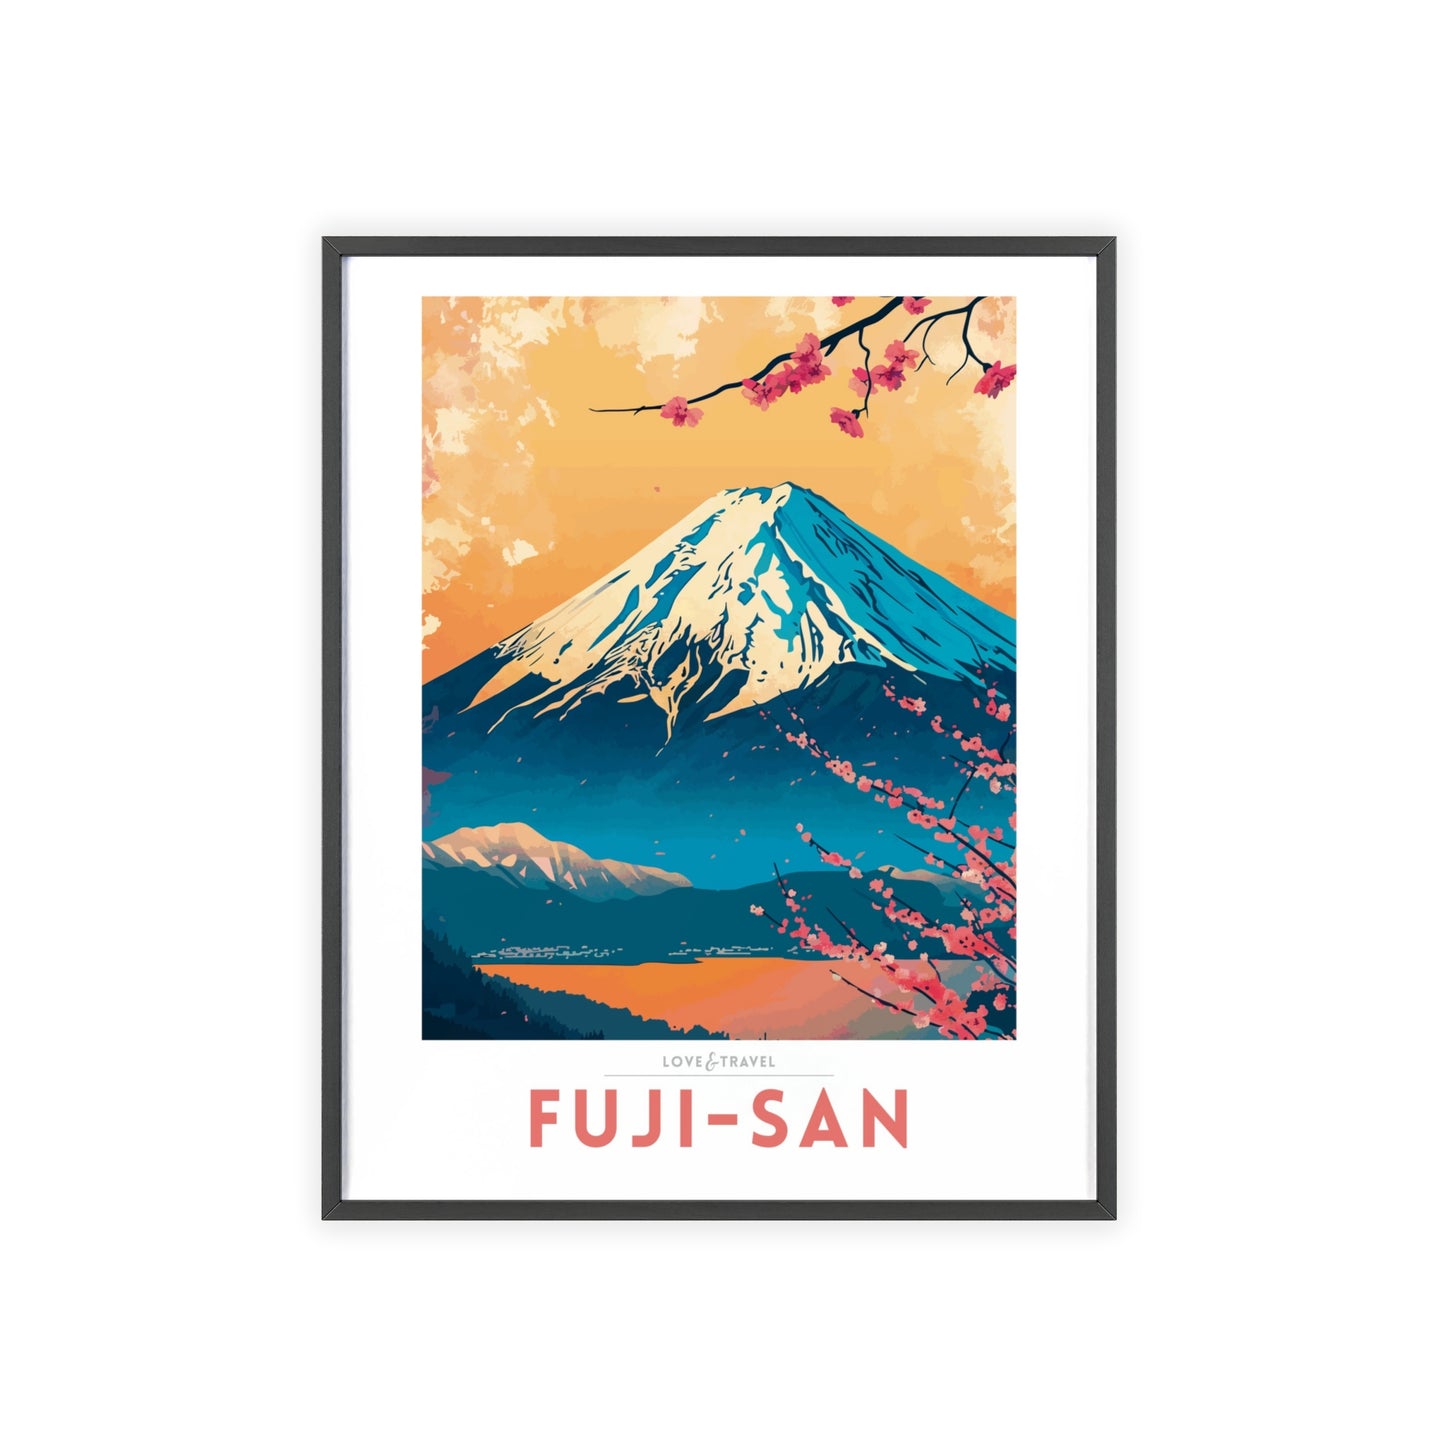 Travel poster of Mount Fuji featuring the iconic peak framed by cherry blossoms, capturing the serene beauty and cultural essence of Japan